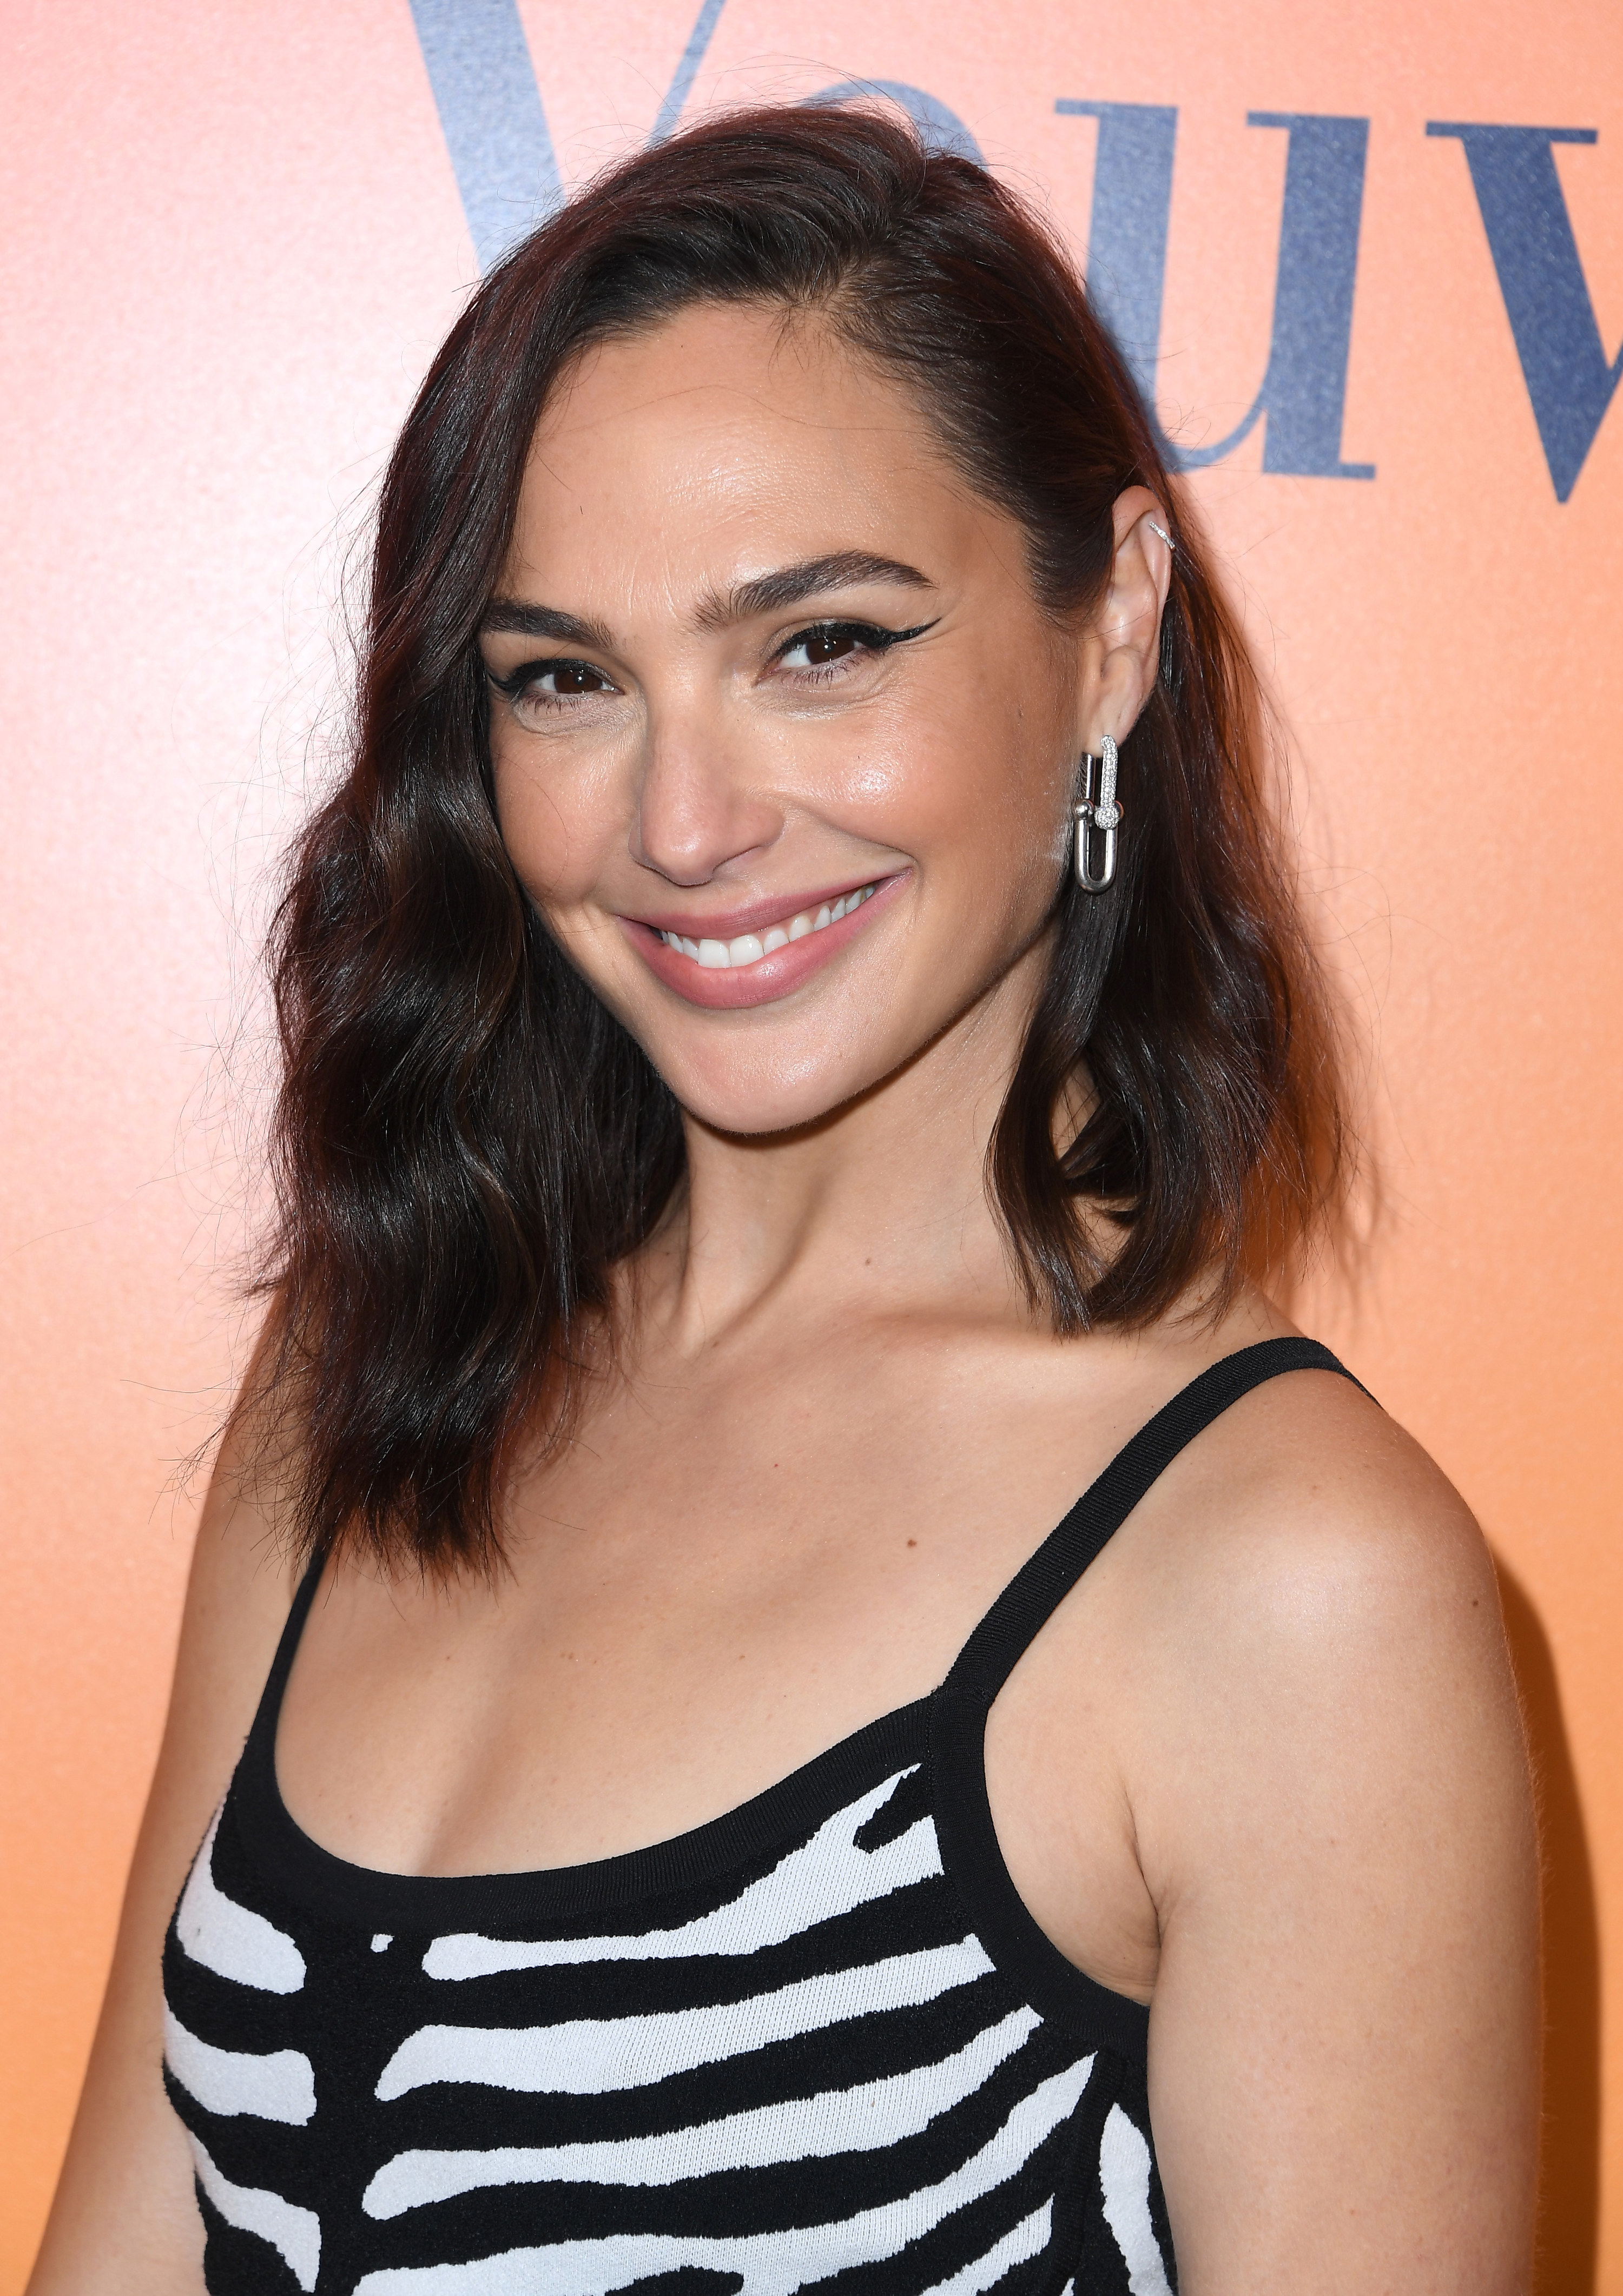 Gal Gadot arrives at the Veuve Clicquot Celebrates 250th Anniversary With Solaire Exhibition